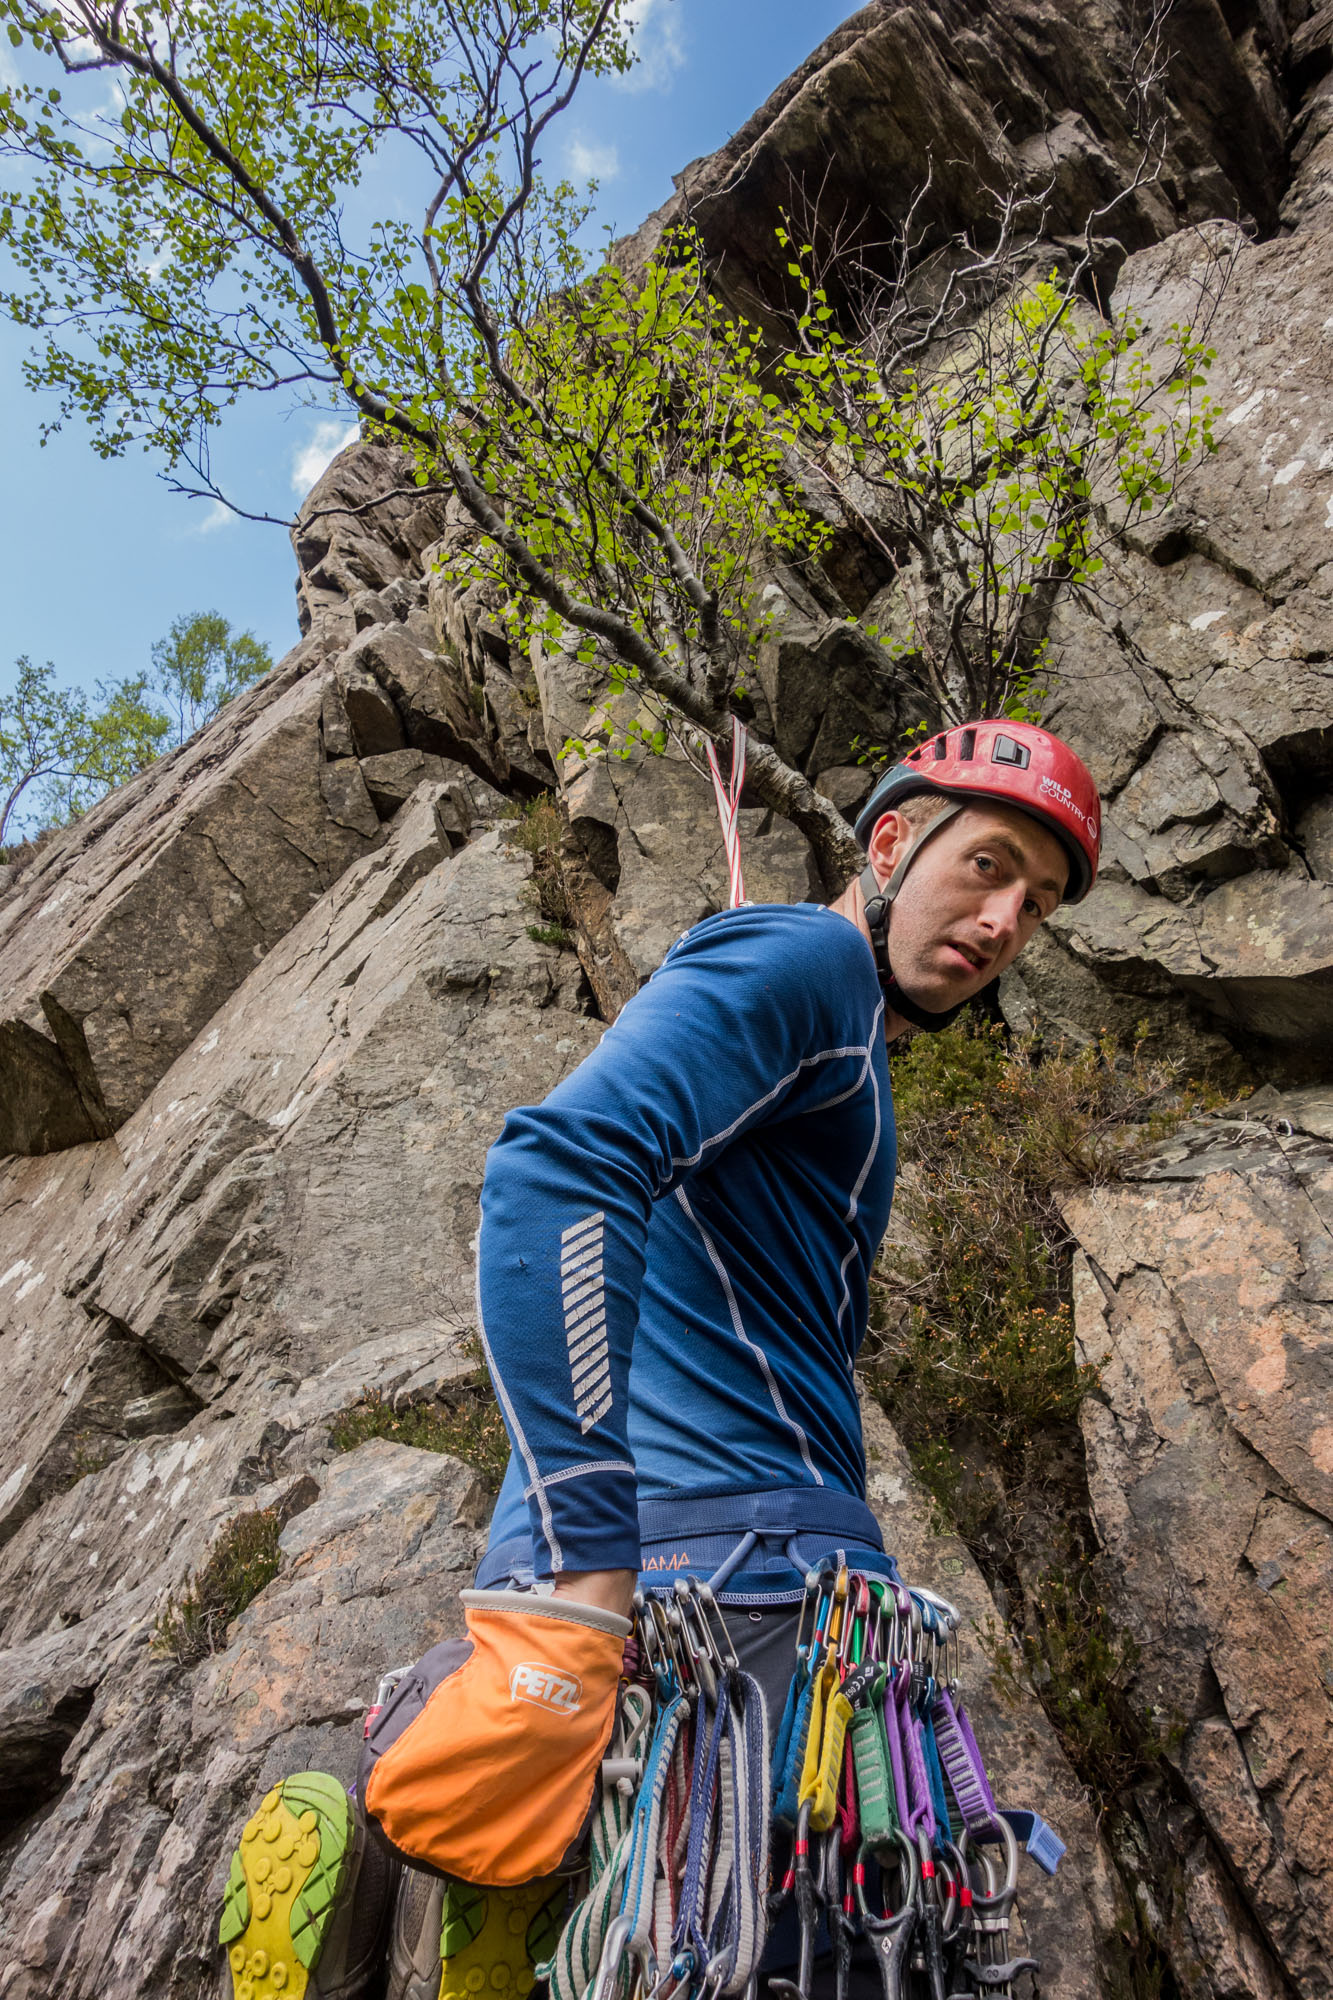 The face says it all - steep, vegetated and loose crack climbing is followed by a squeeze-chimney on the worryingly named Cervix